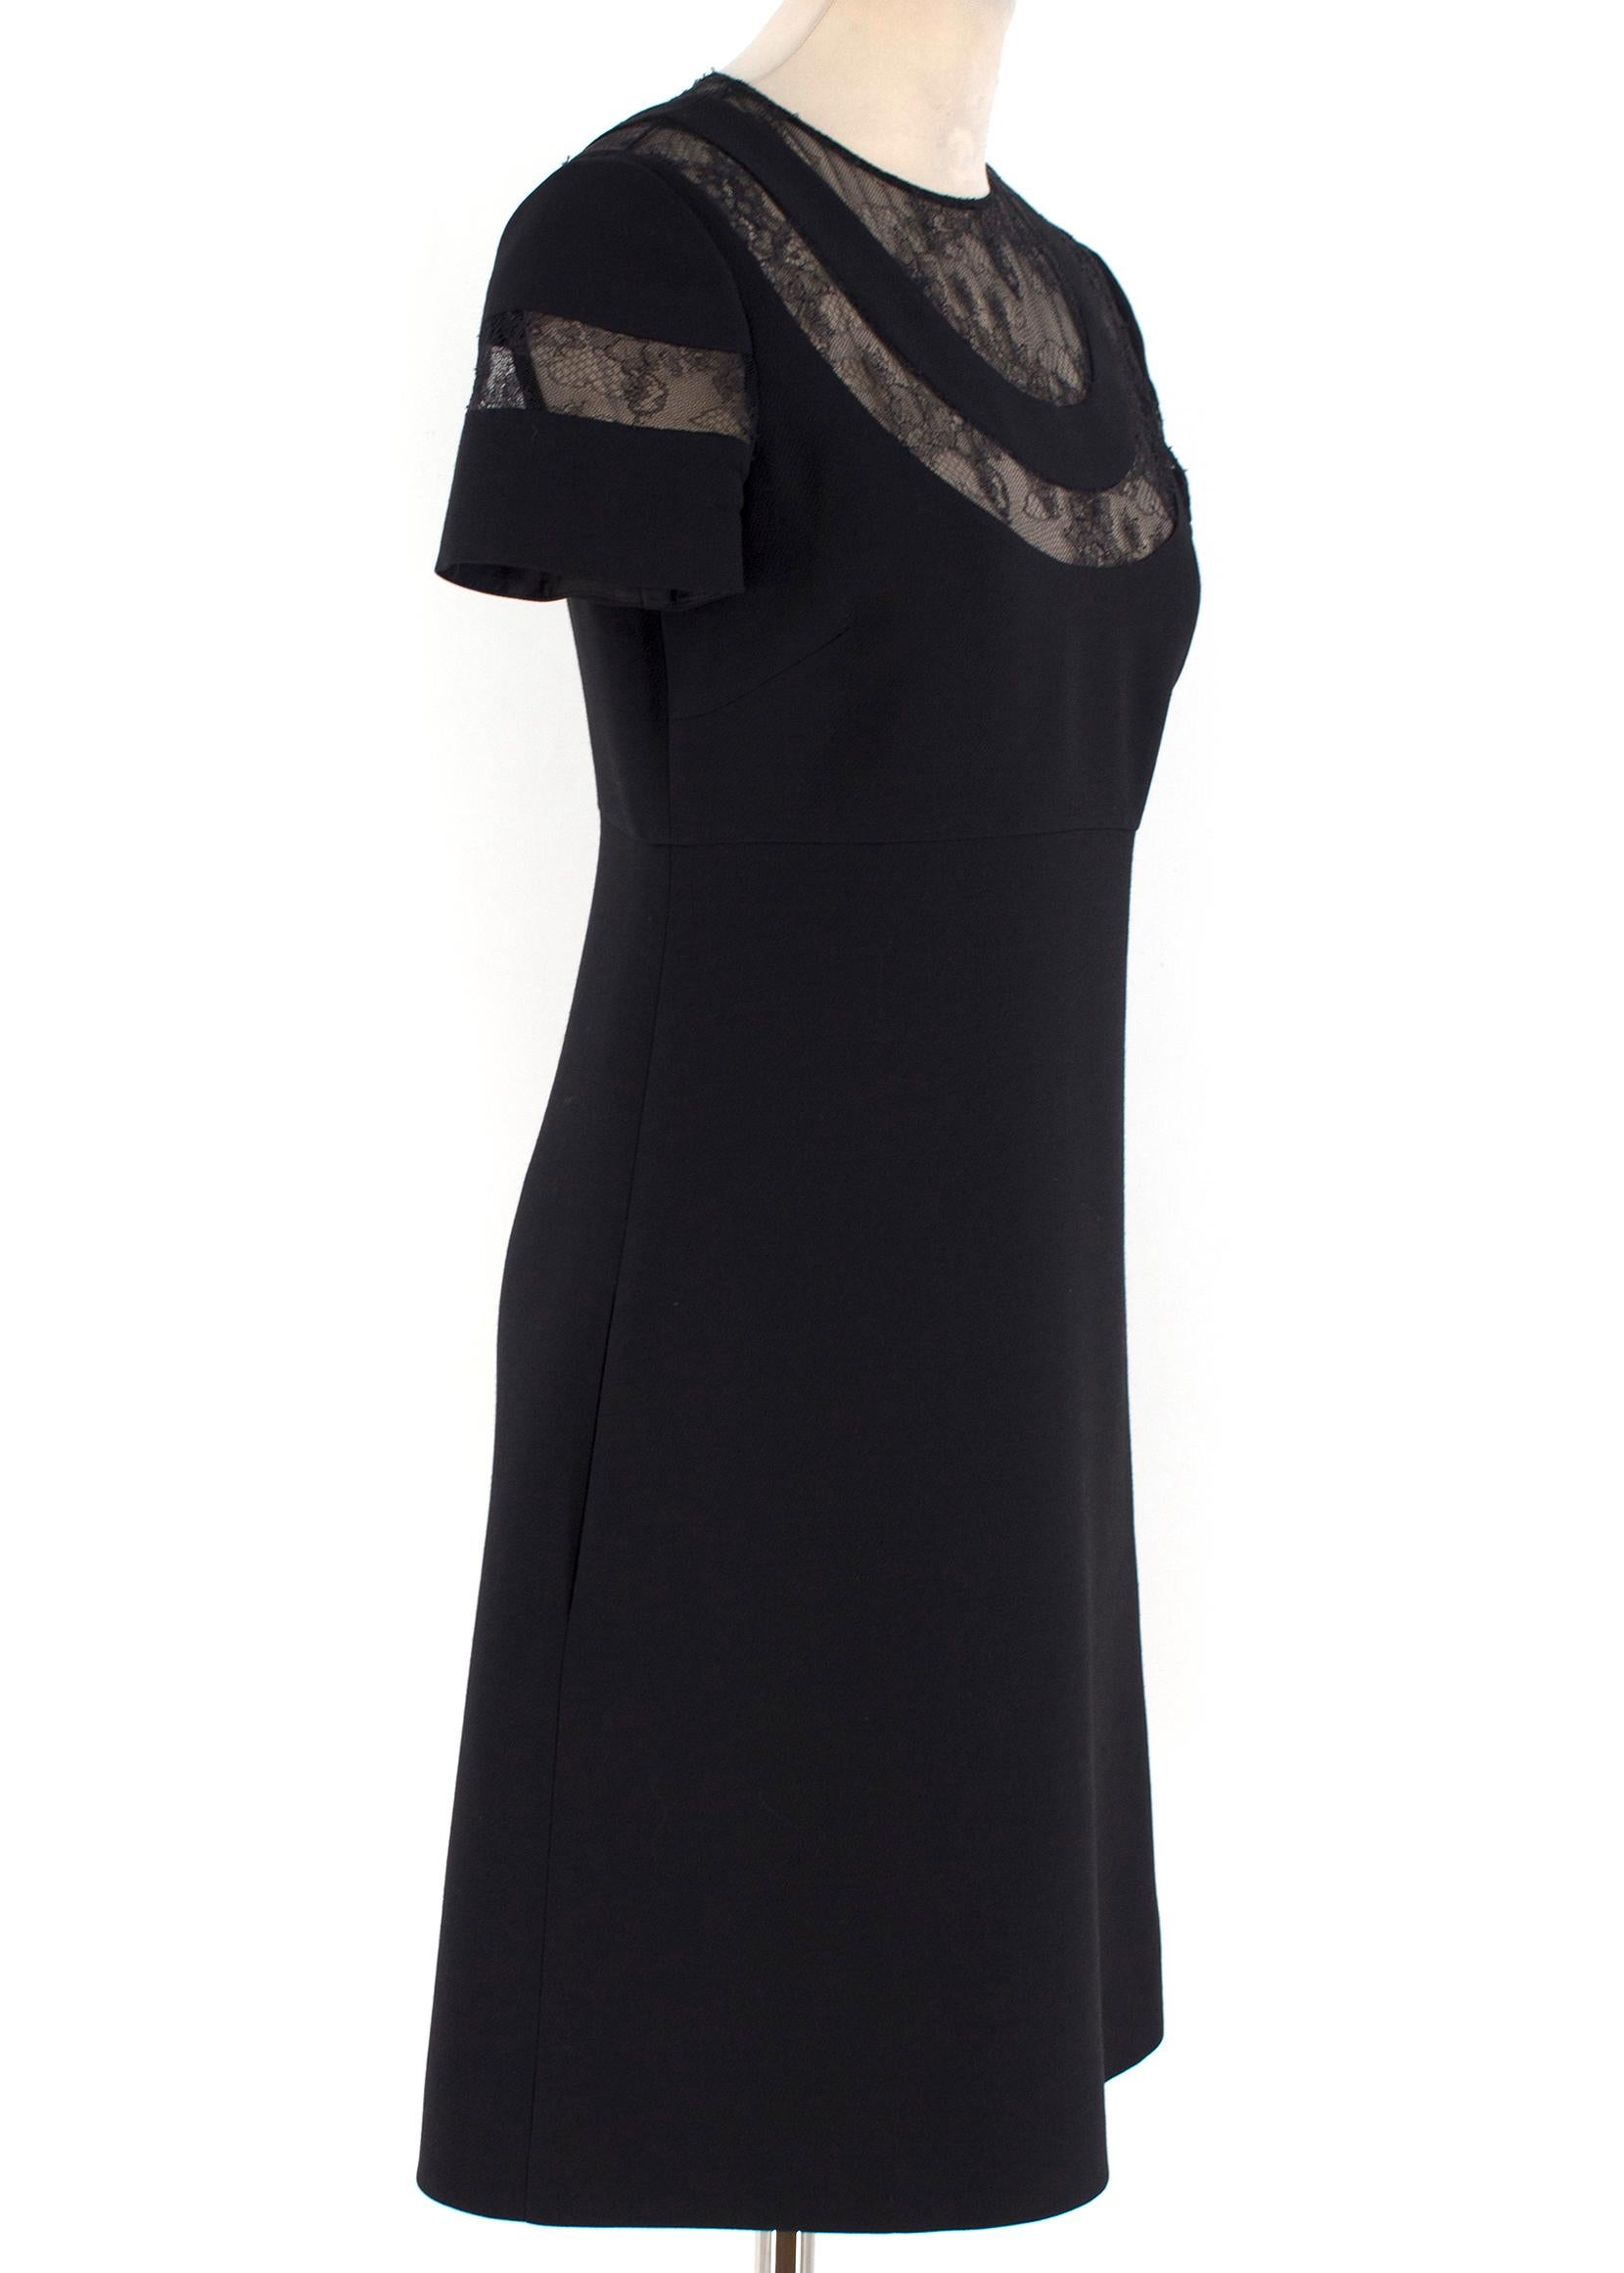 Valentino Black Lace-Insert Cady Dress

-Black short sleeve mini dress
-Sheer lave panelling at the shoulder, back and sleeves
-Back zip closure
-Tailored around the bust and waist
-Two front pockets
- Approx size UK12 / M / 44IT / 40FR

Please